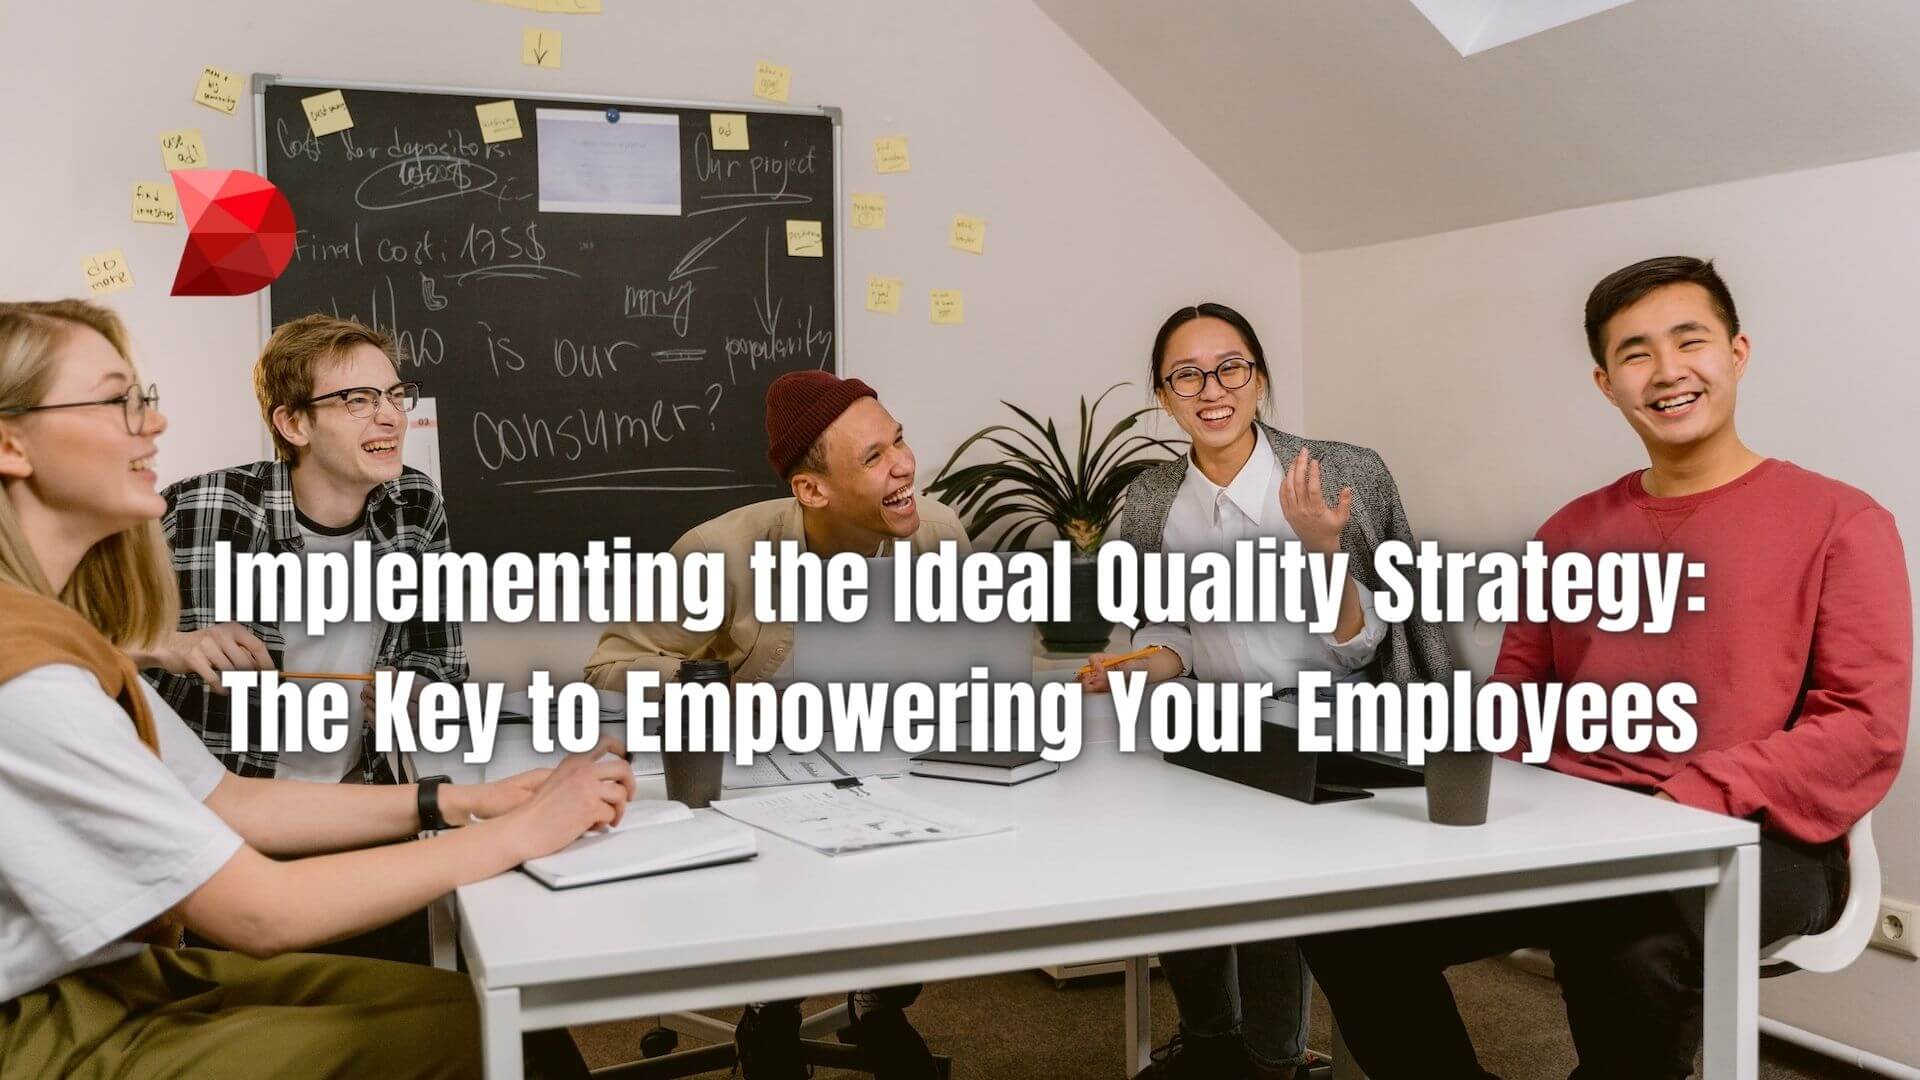 Empowering your employees is a crucial strategy for long-term success. Here's how to build a company culture that empowers employees.